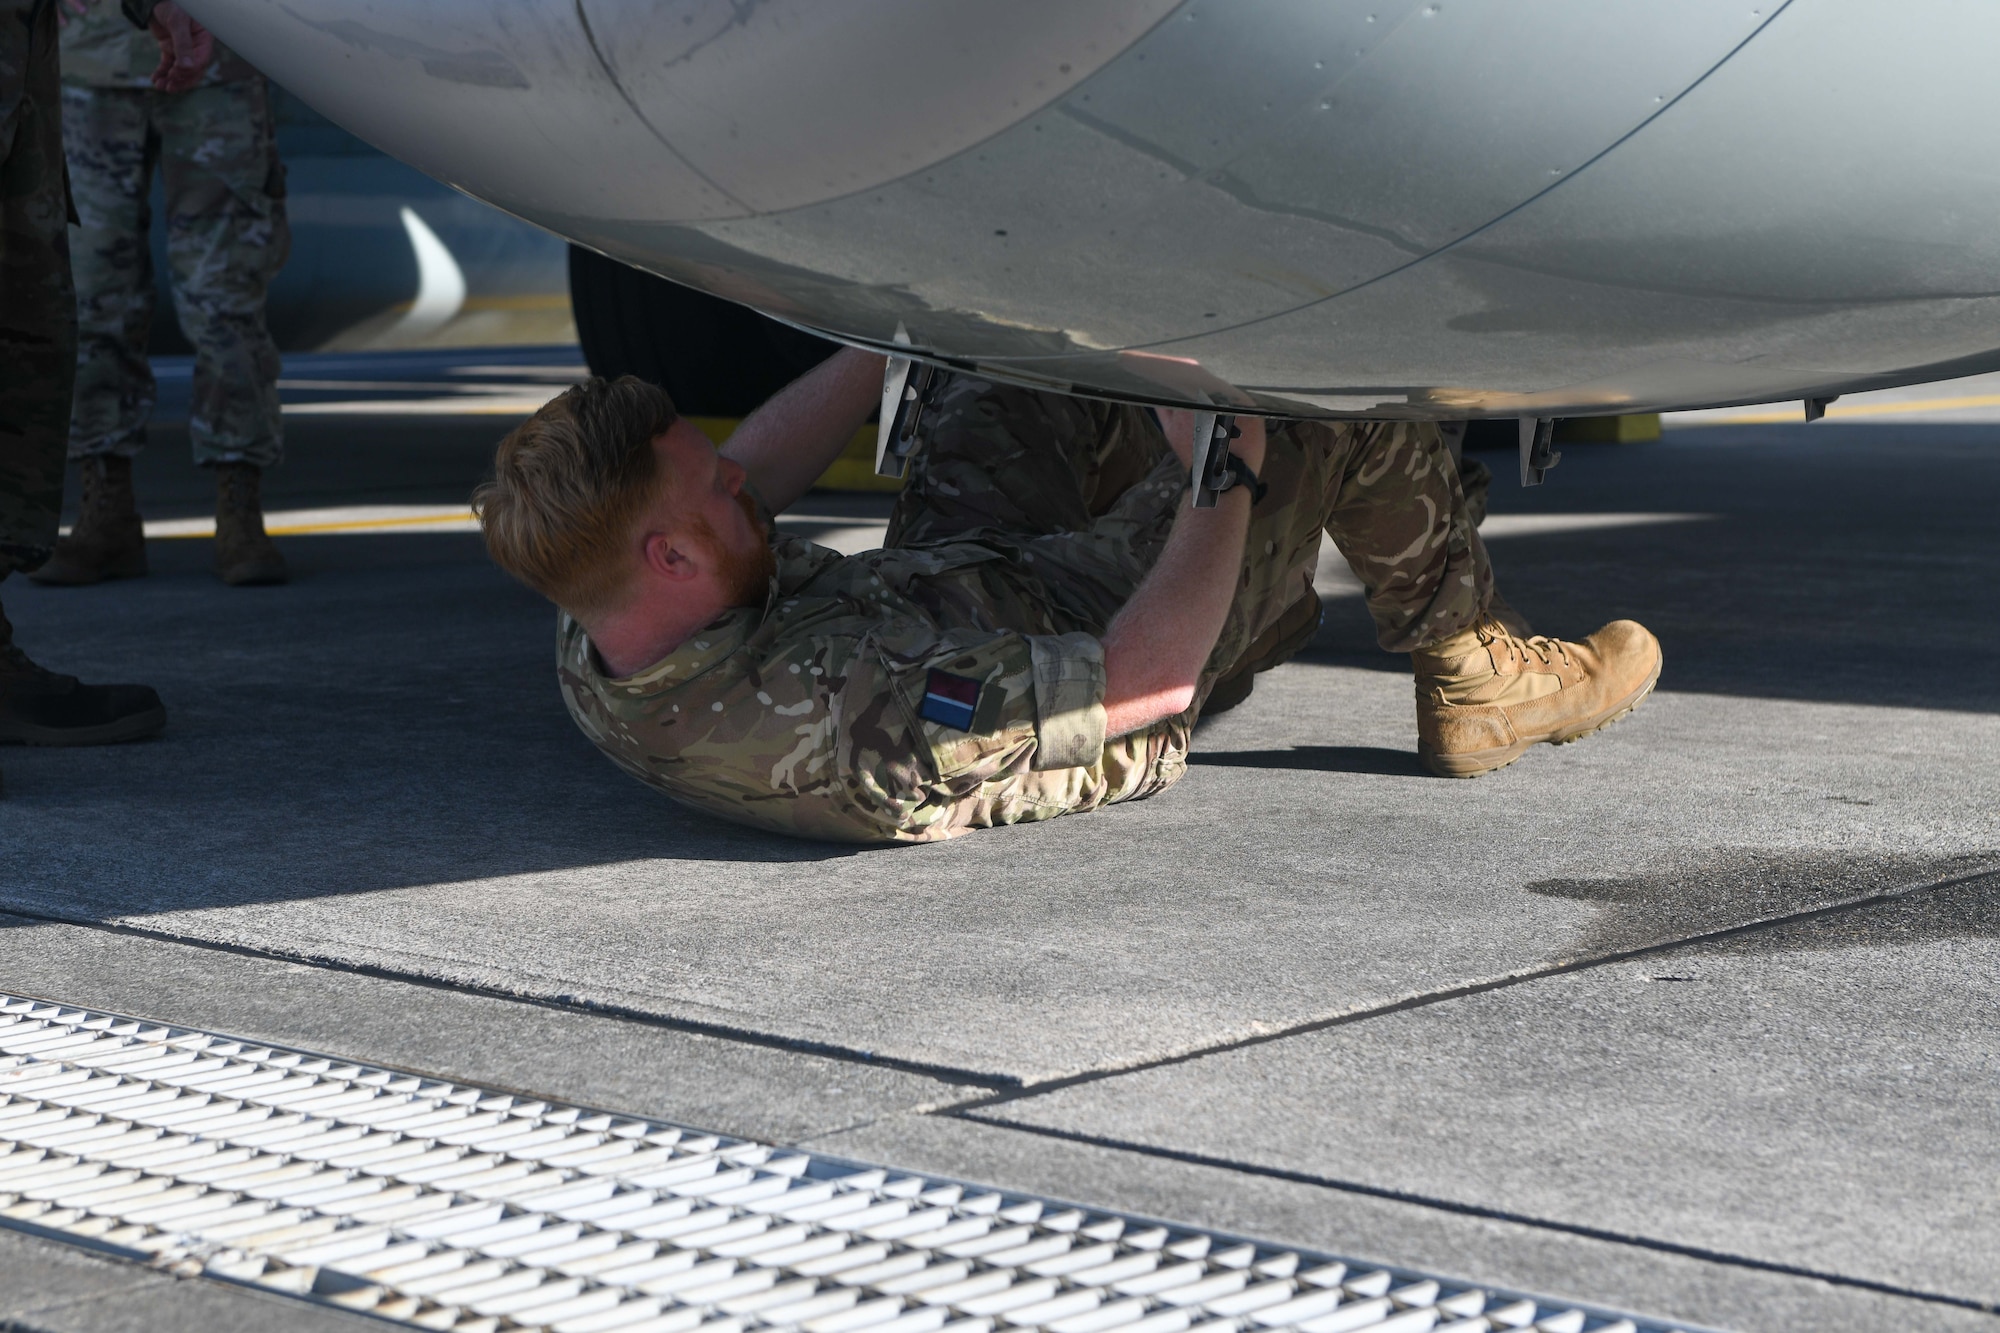 RAF aviator performs routine maintenance on an aircraft.